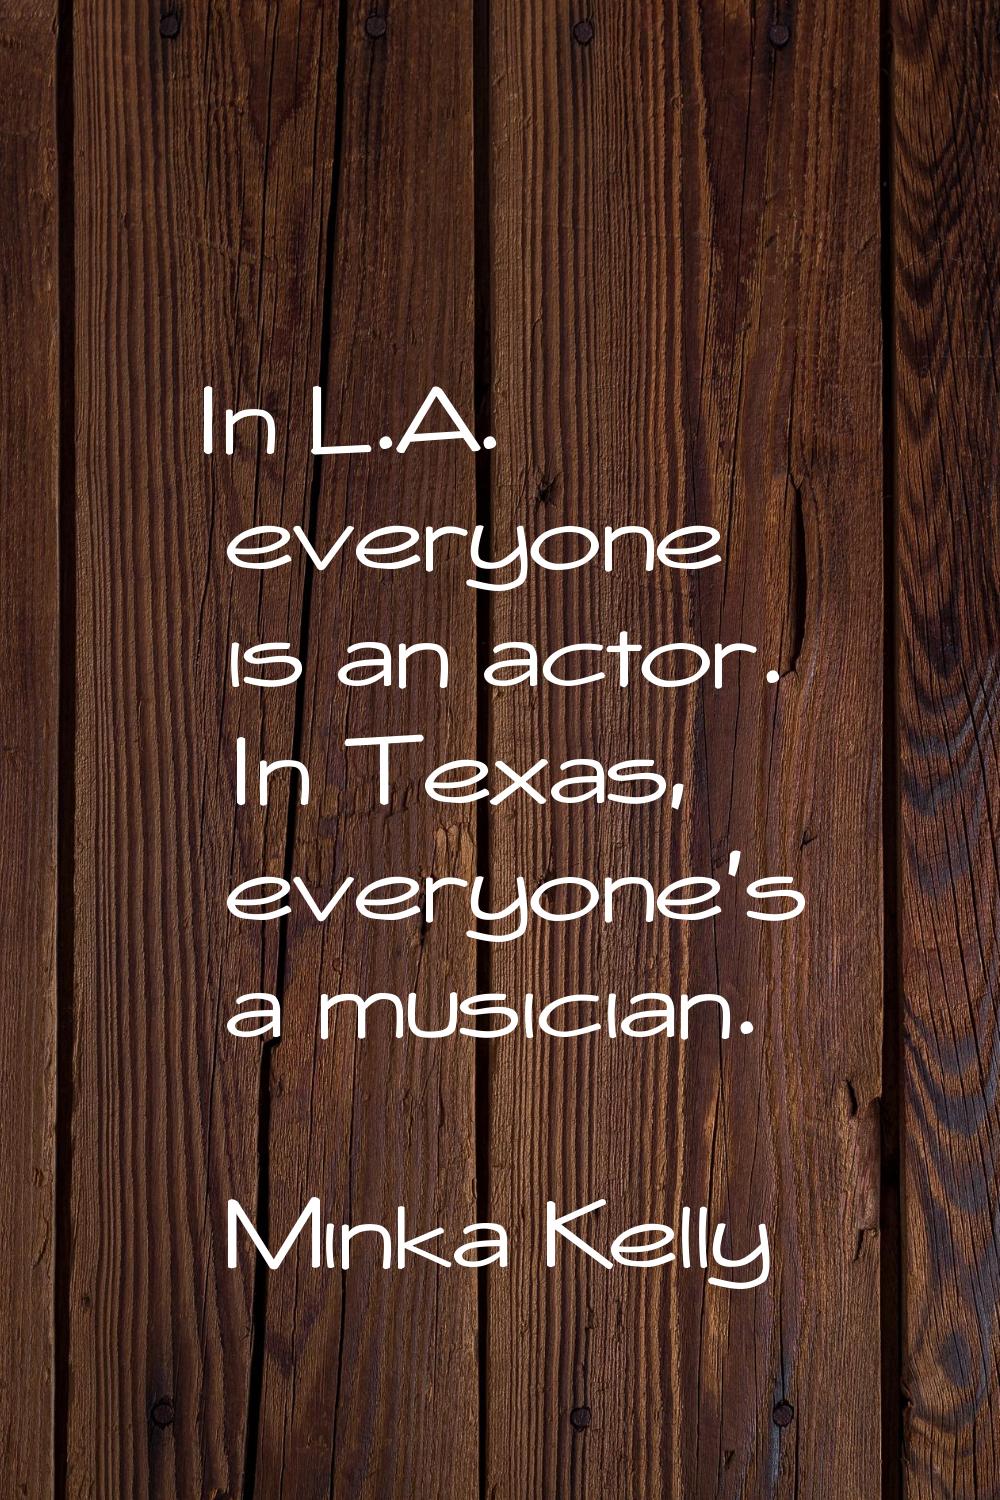 In L.A. everyone is an actor. In Texas, everyone's a musician.